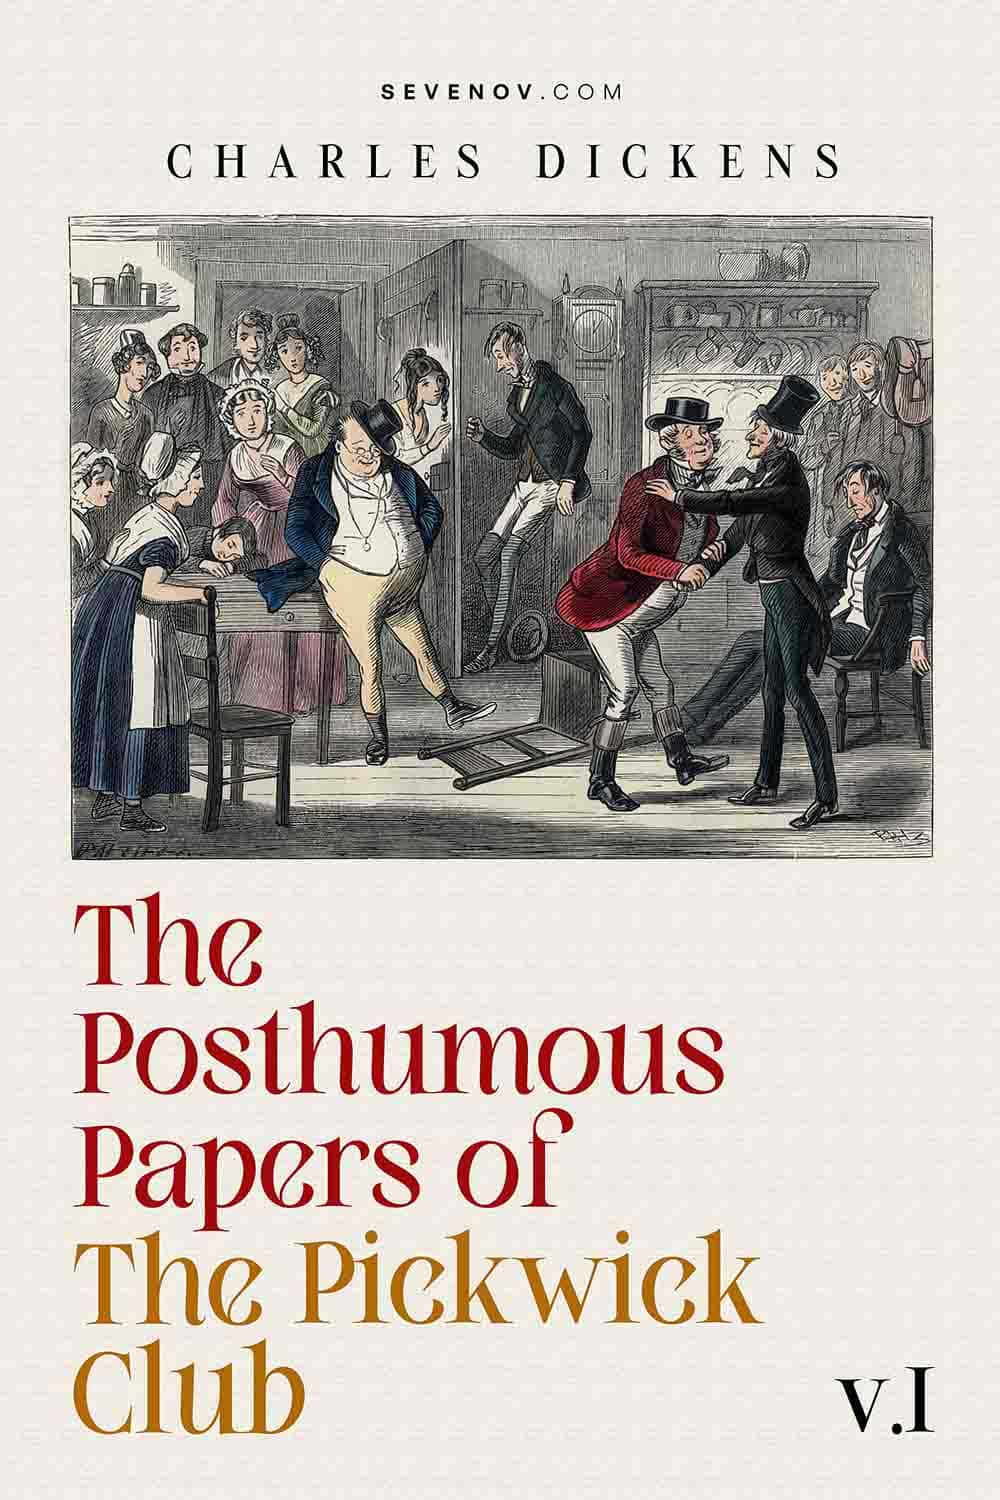 https://pagevio.com/wp-content/uploads/2022/12/the-posthumous-papers-of-the-pickwick-club-volume-1-20220901.jpg